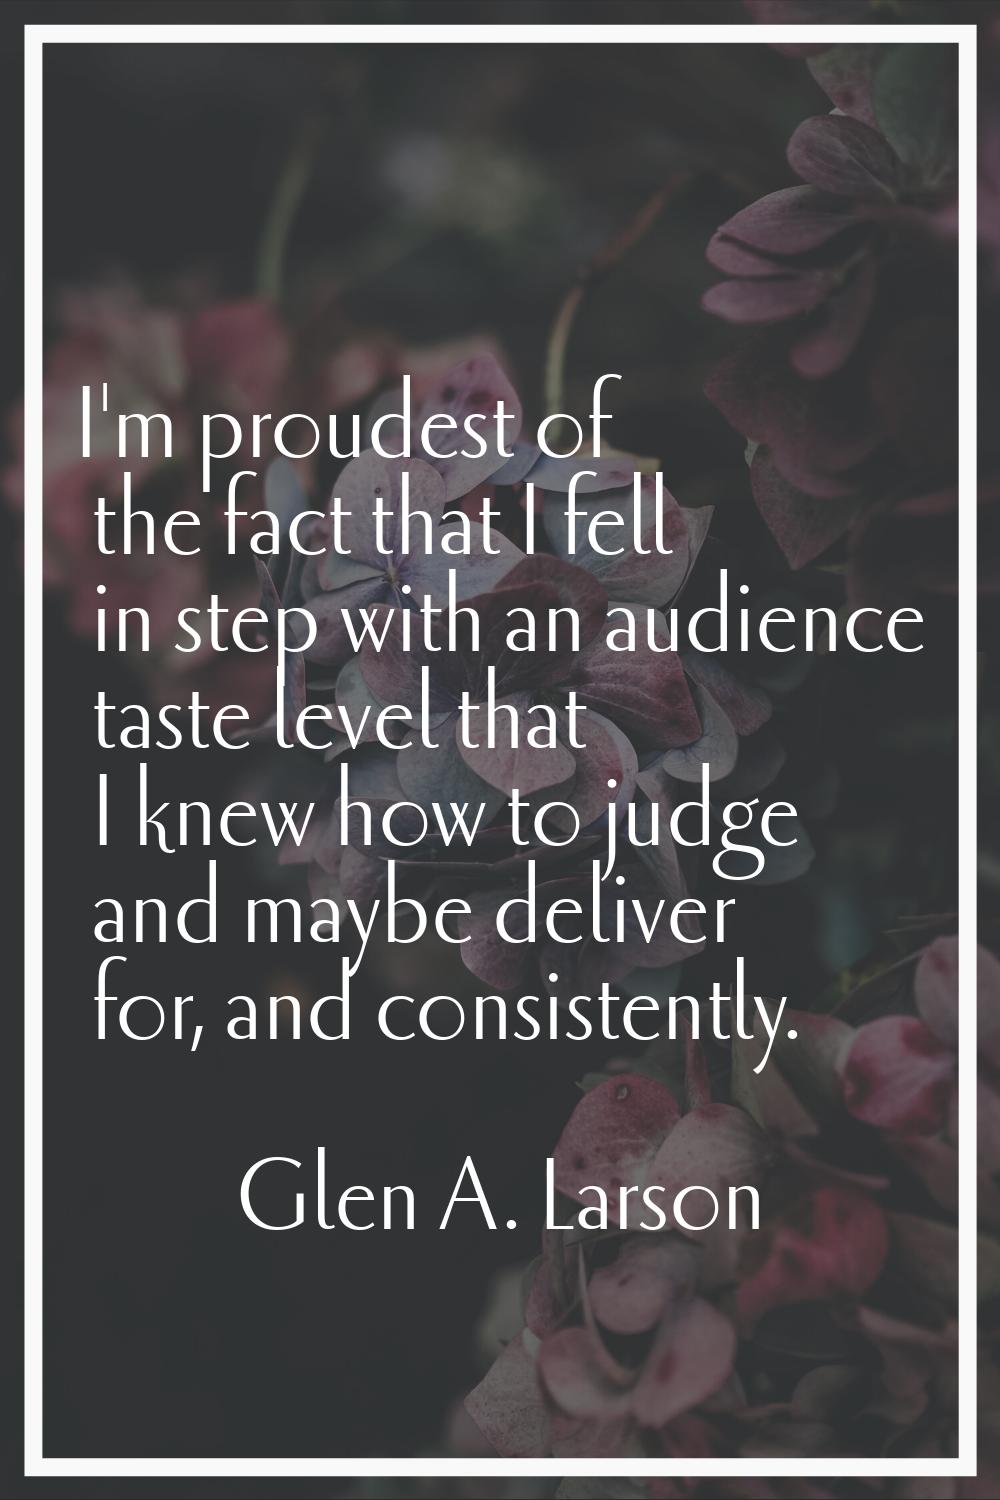 I'm proudest of the fact that I fell in step with an audience taste level that I knew how to judge 